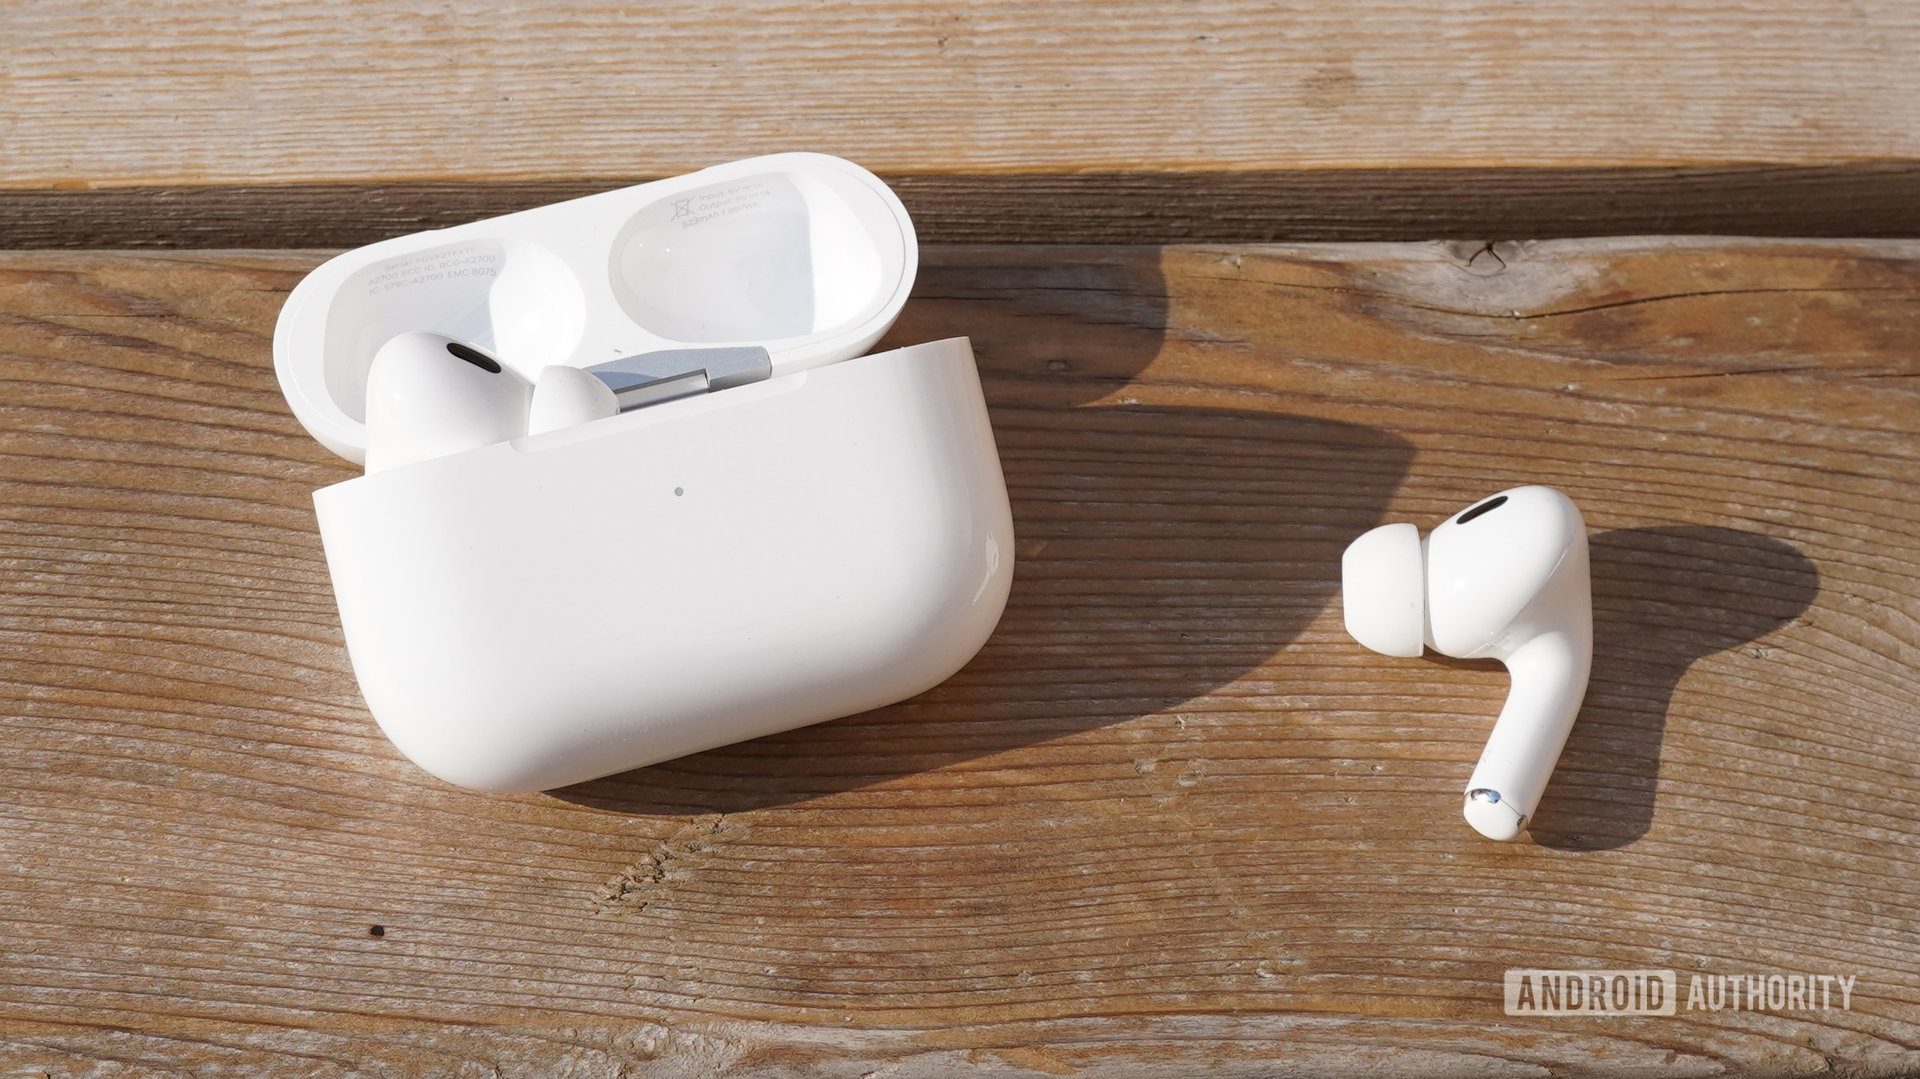 The AirPods Pro 2 with one earbud sitting outside their case on a wooden surface with the case nearby.